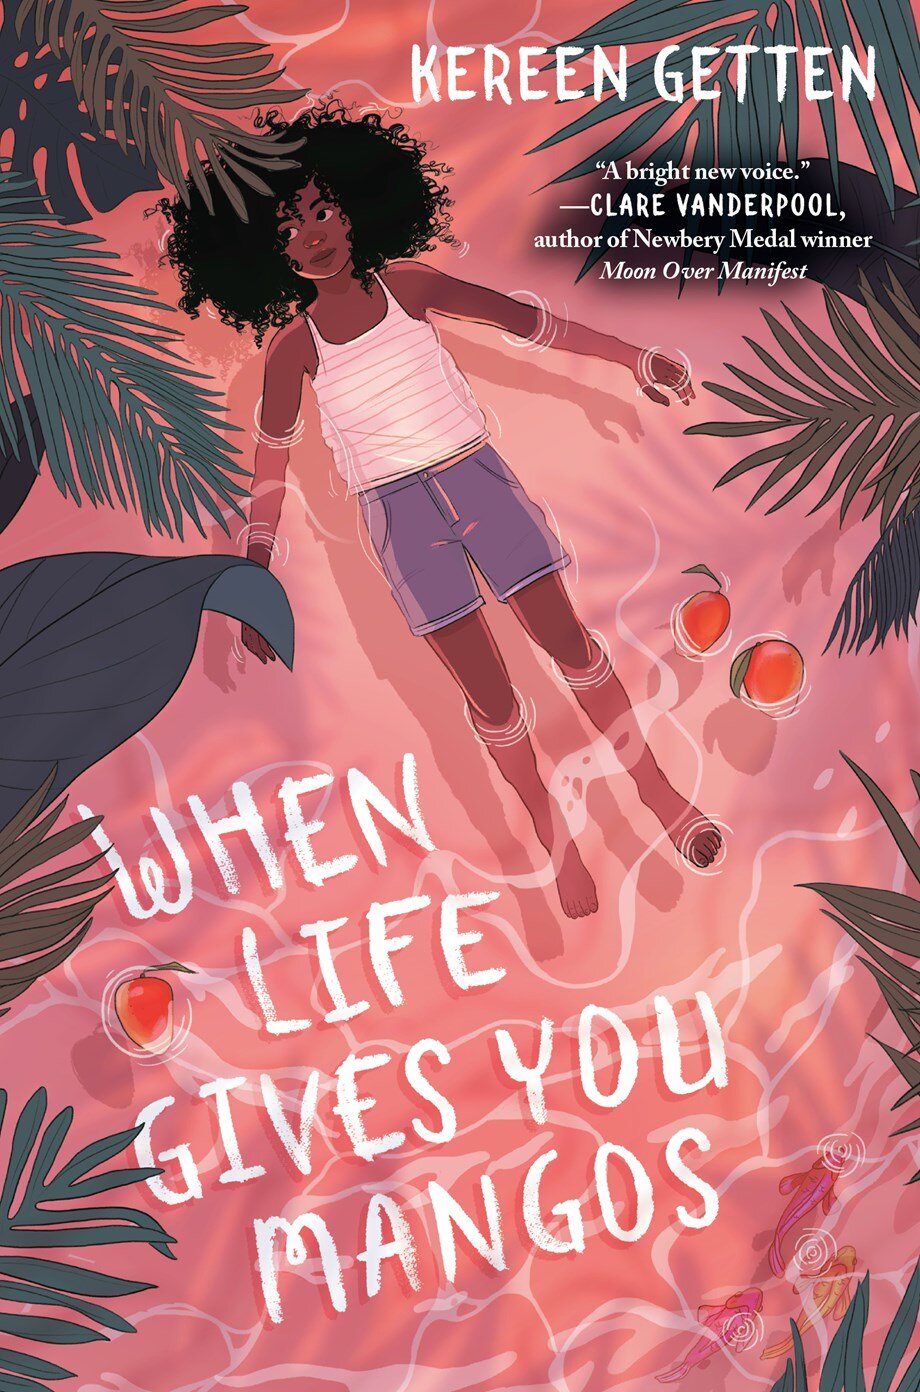   For fans of deeply poignant middle grade about friendship and loss like  The Thing About Jellyfish , comes the story about a young girl who can’t remember anything from her previous summer after a hurricane.   Twelve-year-old Clara lives on an isla